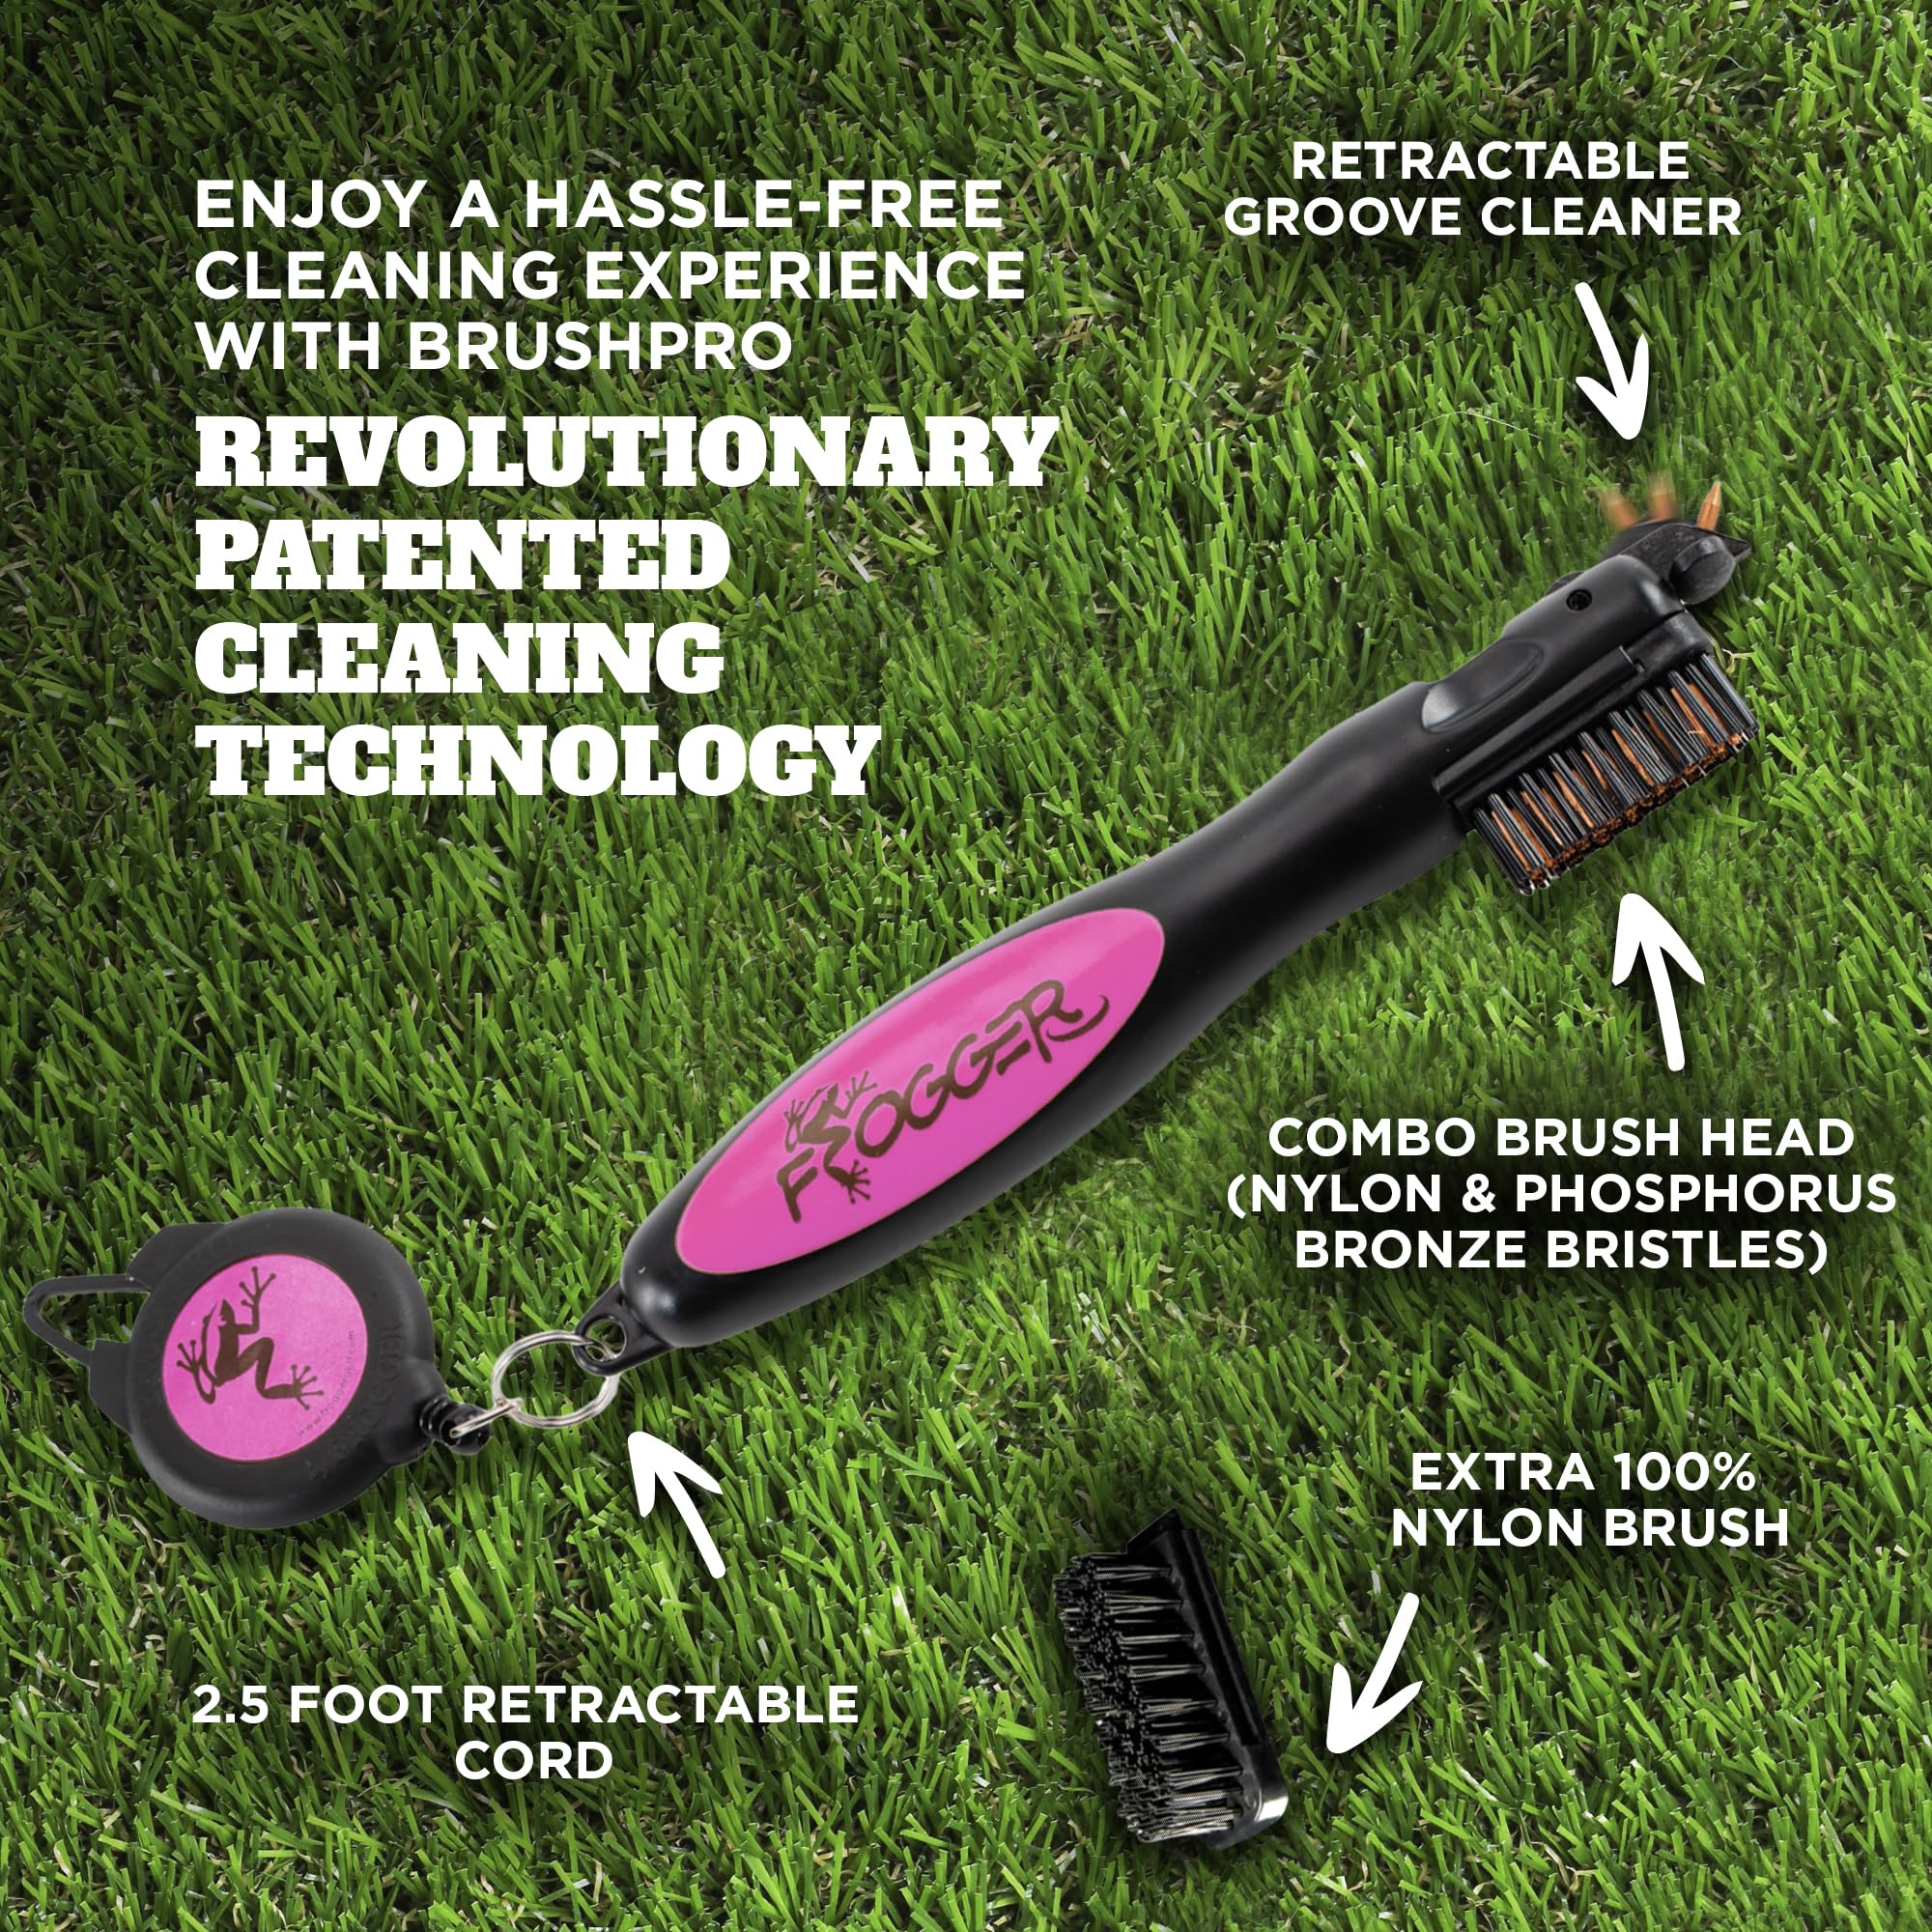 Frogger BrushPro Golf Club Cleaner with Ergonomic Grip and Retractable Cord | Sturdy Golf Brush and Groove Cleaner with Advanced Scrub Cleaning Technology for Professional Golfers